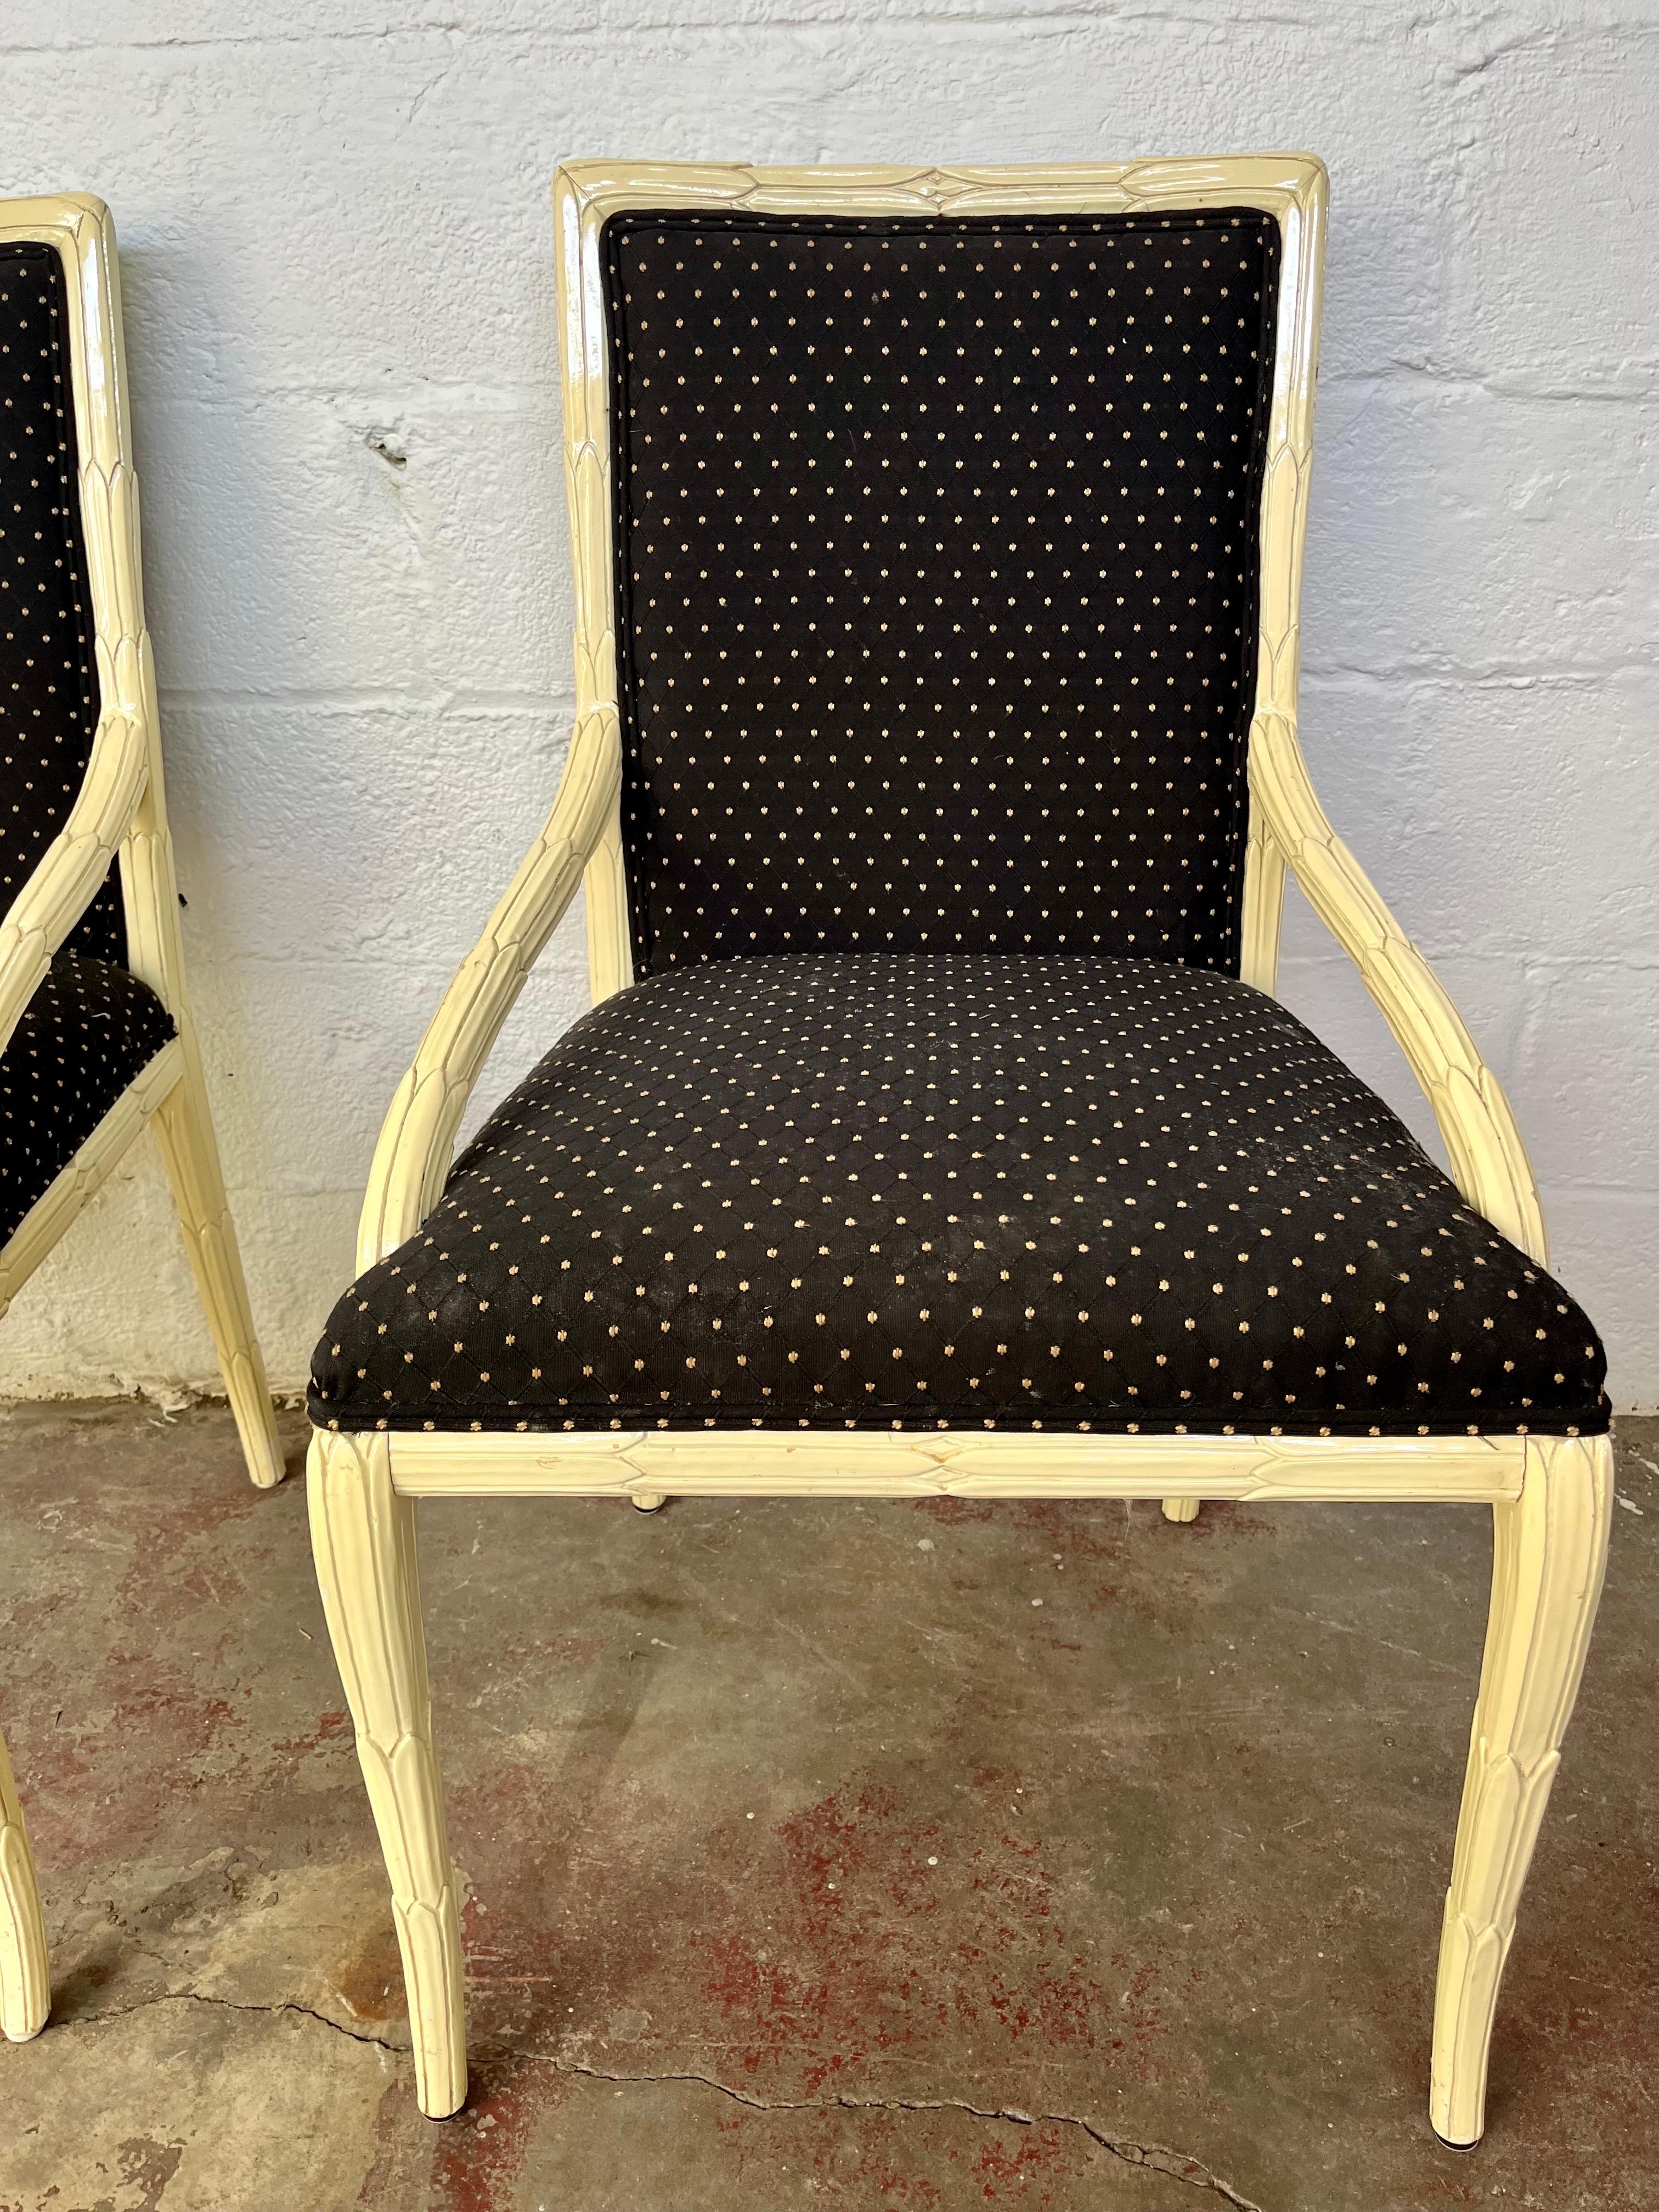 Hollywood Regency Palm Frond dining chairs. Deep detail in lacquer finish with upholstery. Century Chair Company icon.
Curbside to NYC/Philly $400